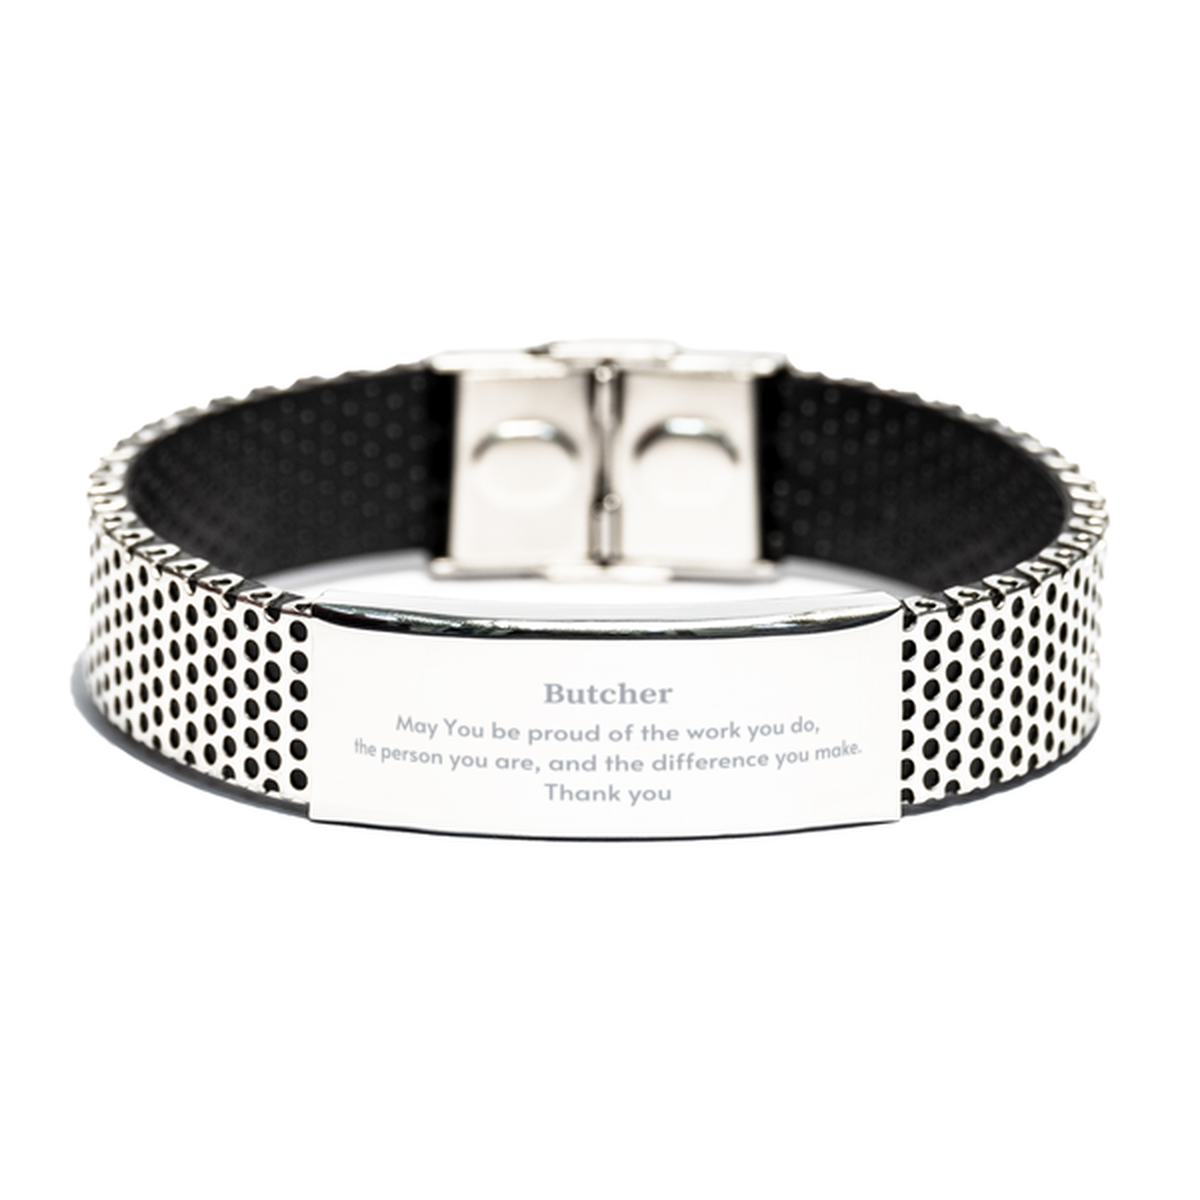 Heartwarming Stainless Steel Bracelet Retirement Coworkers Gifts for Butcher, Butcher May You be proud of the work you do, the person you are Gifts for Boss Men Women Friends